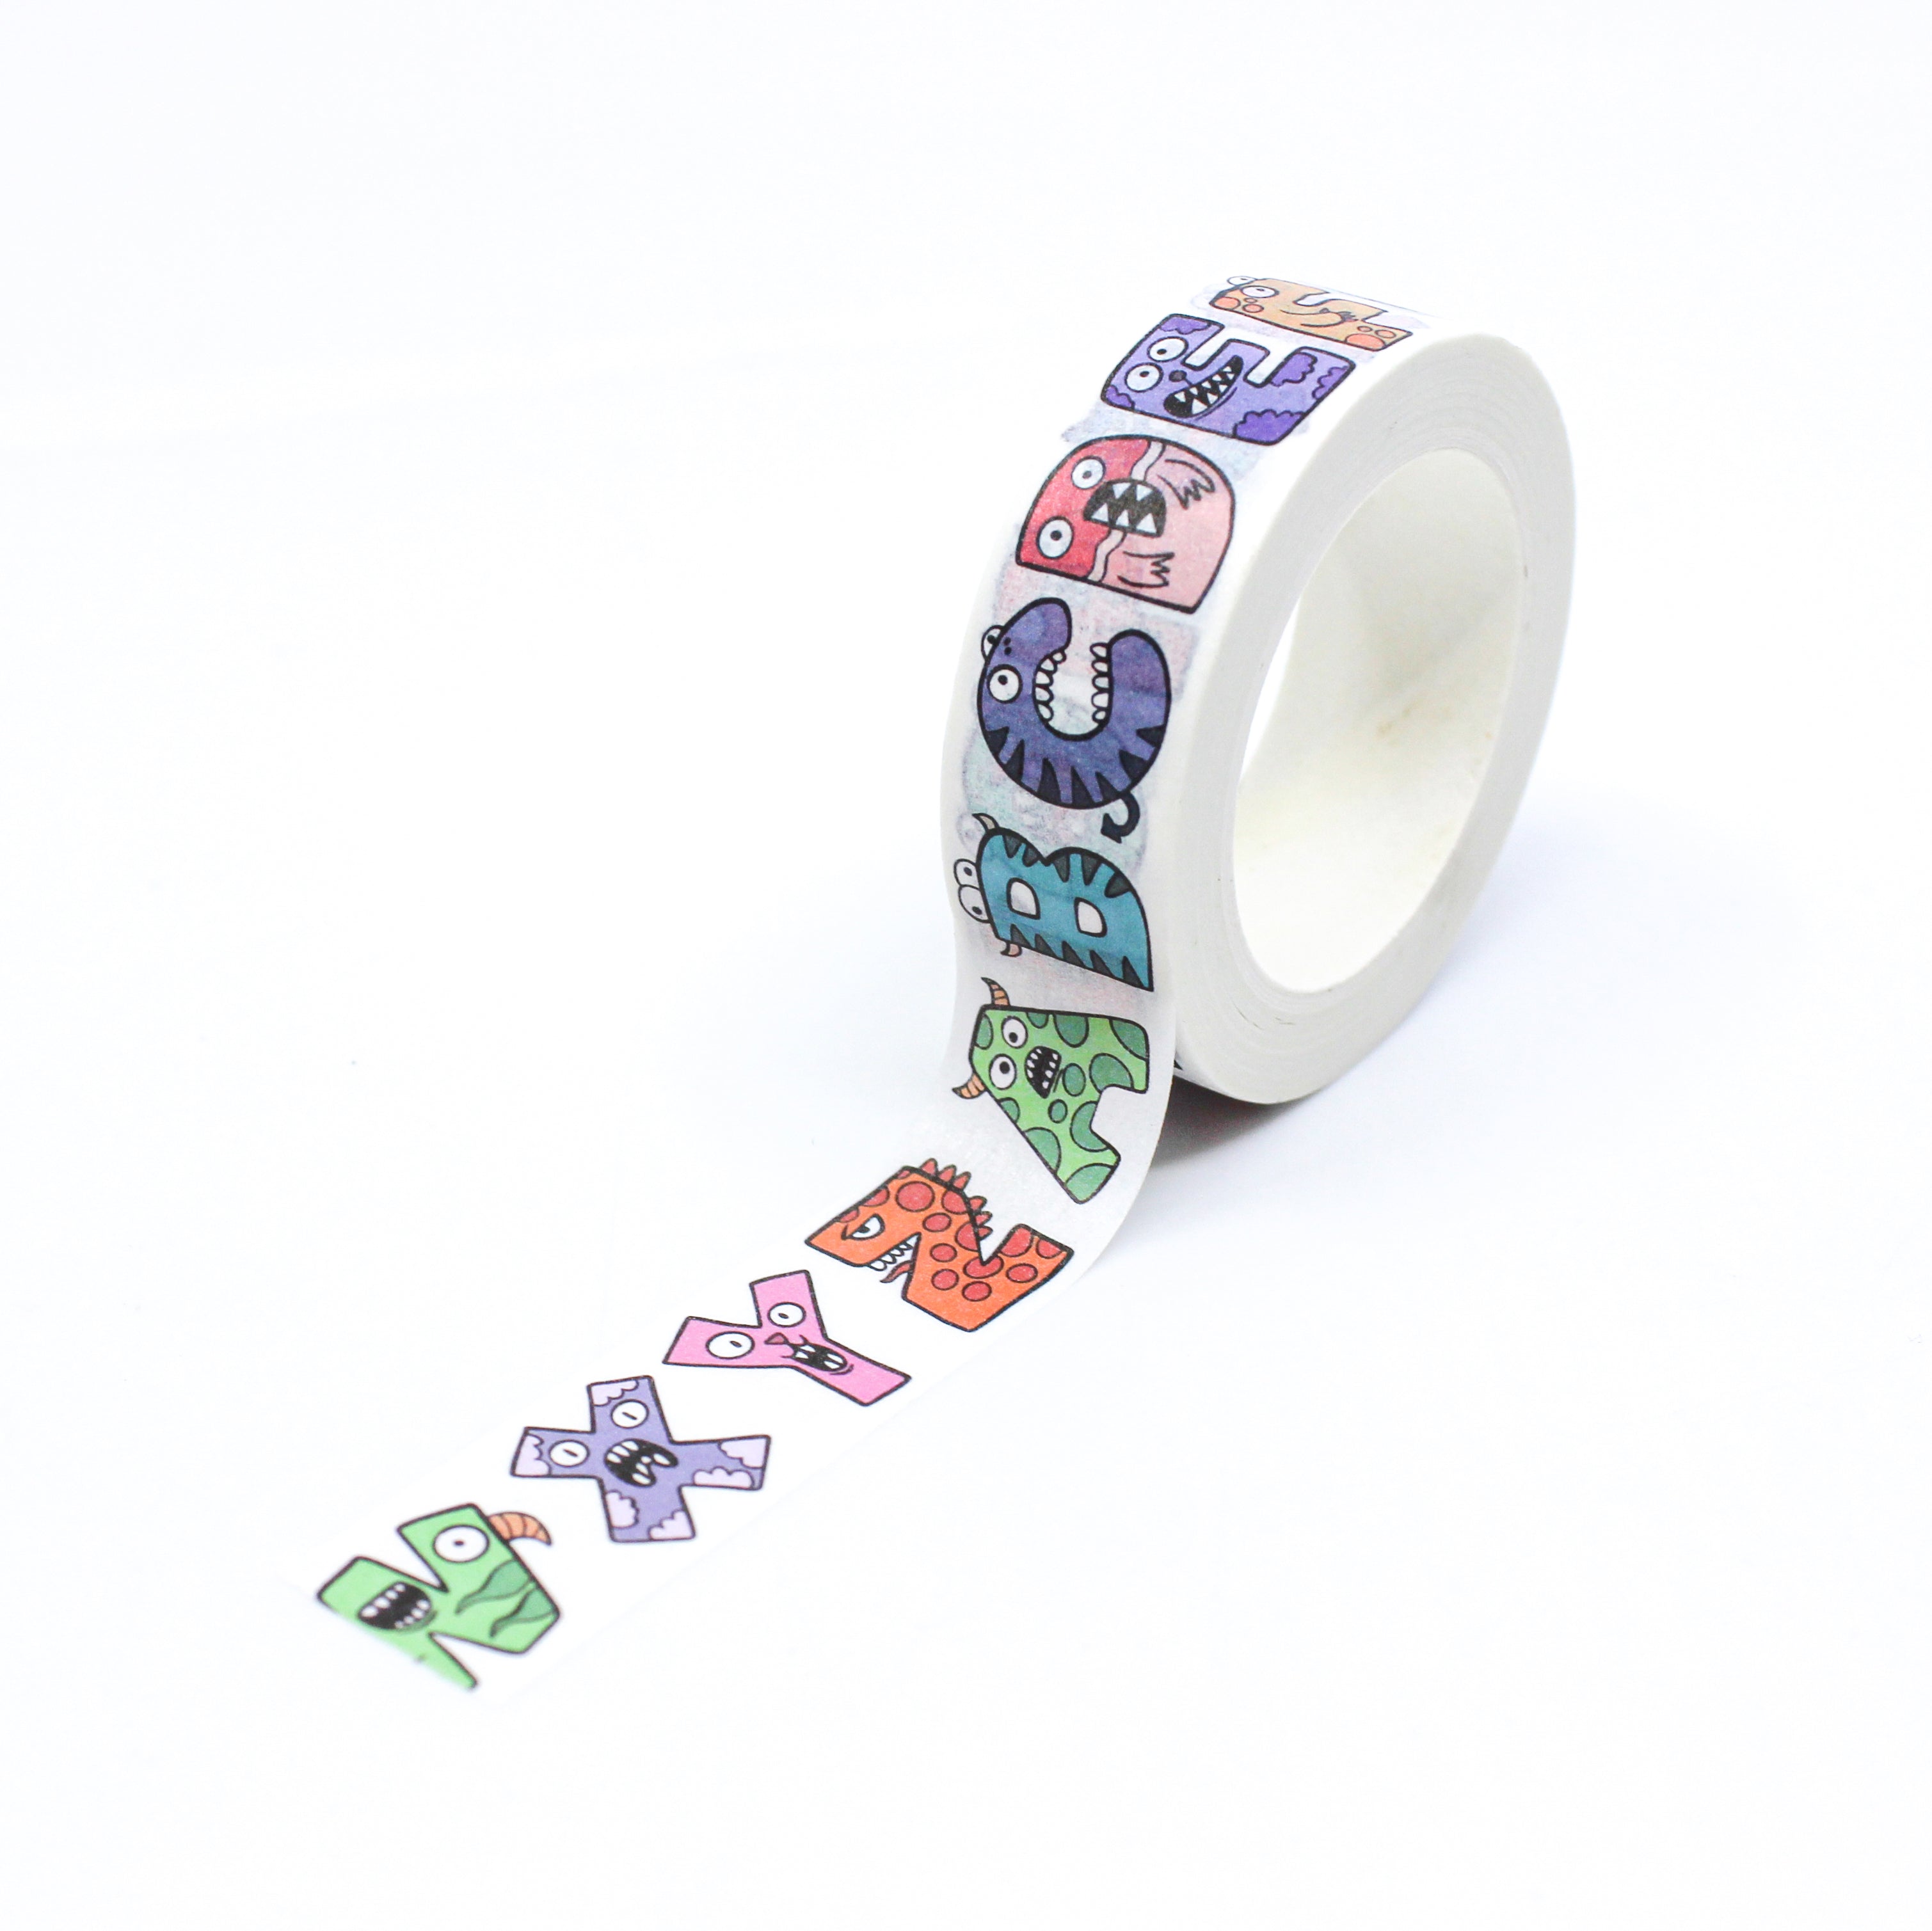  Alphabet Washi Tape (1 Roll - 9/16 Wide x 10.95 Yards Long) -  ABC Letters Kids Learning Tools, Teacher Education Supplies, Cute Washi Tape,  Crafting Tape, Children's Birthday Gift Wrap Tape